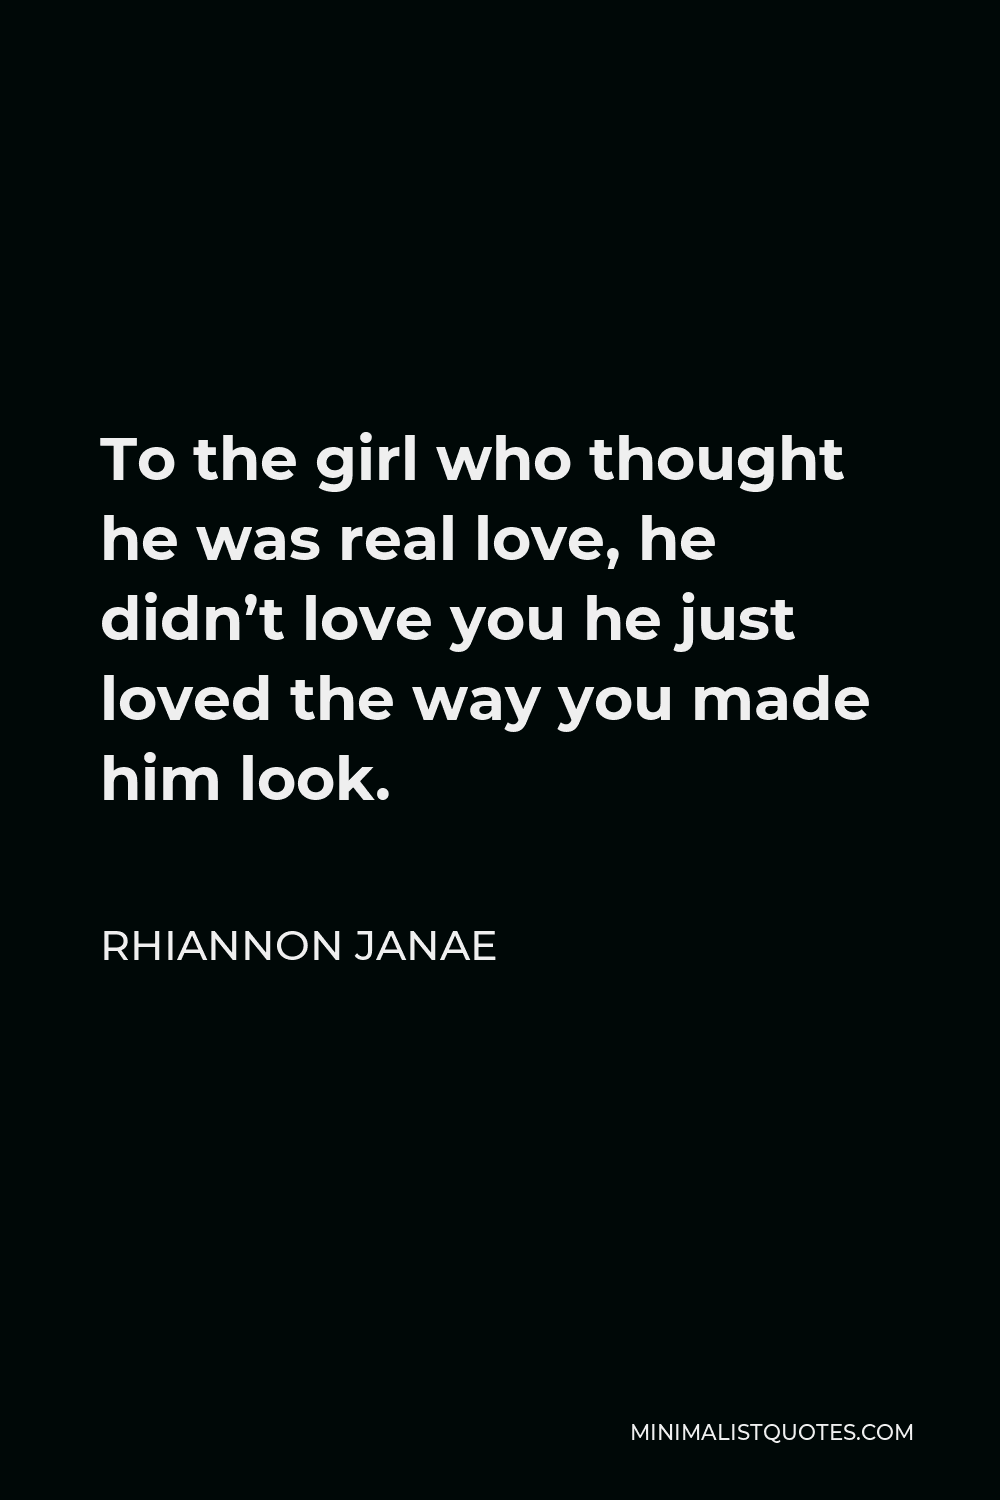 Rhiannon Janae Quote - To the girl who thought he was real love, he didn’t love you he just loved the way you made him look.